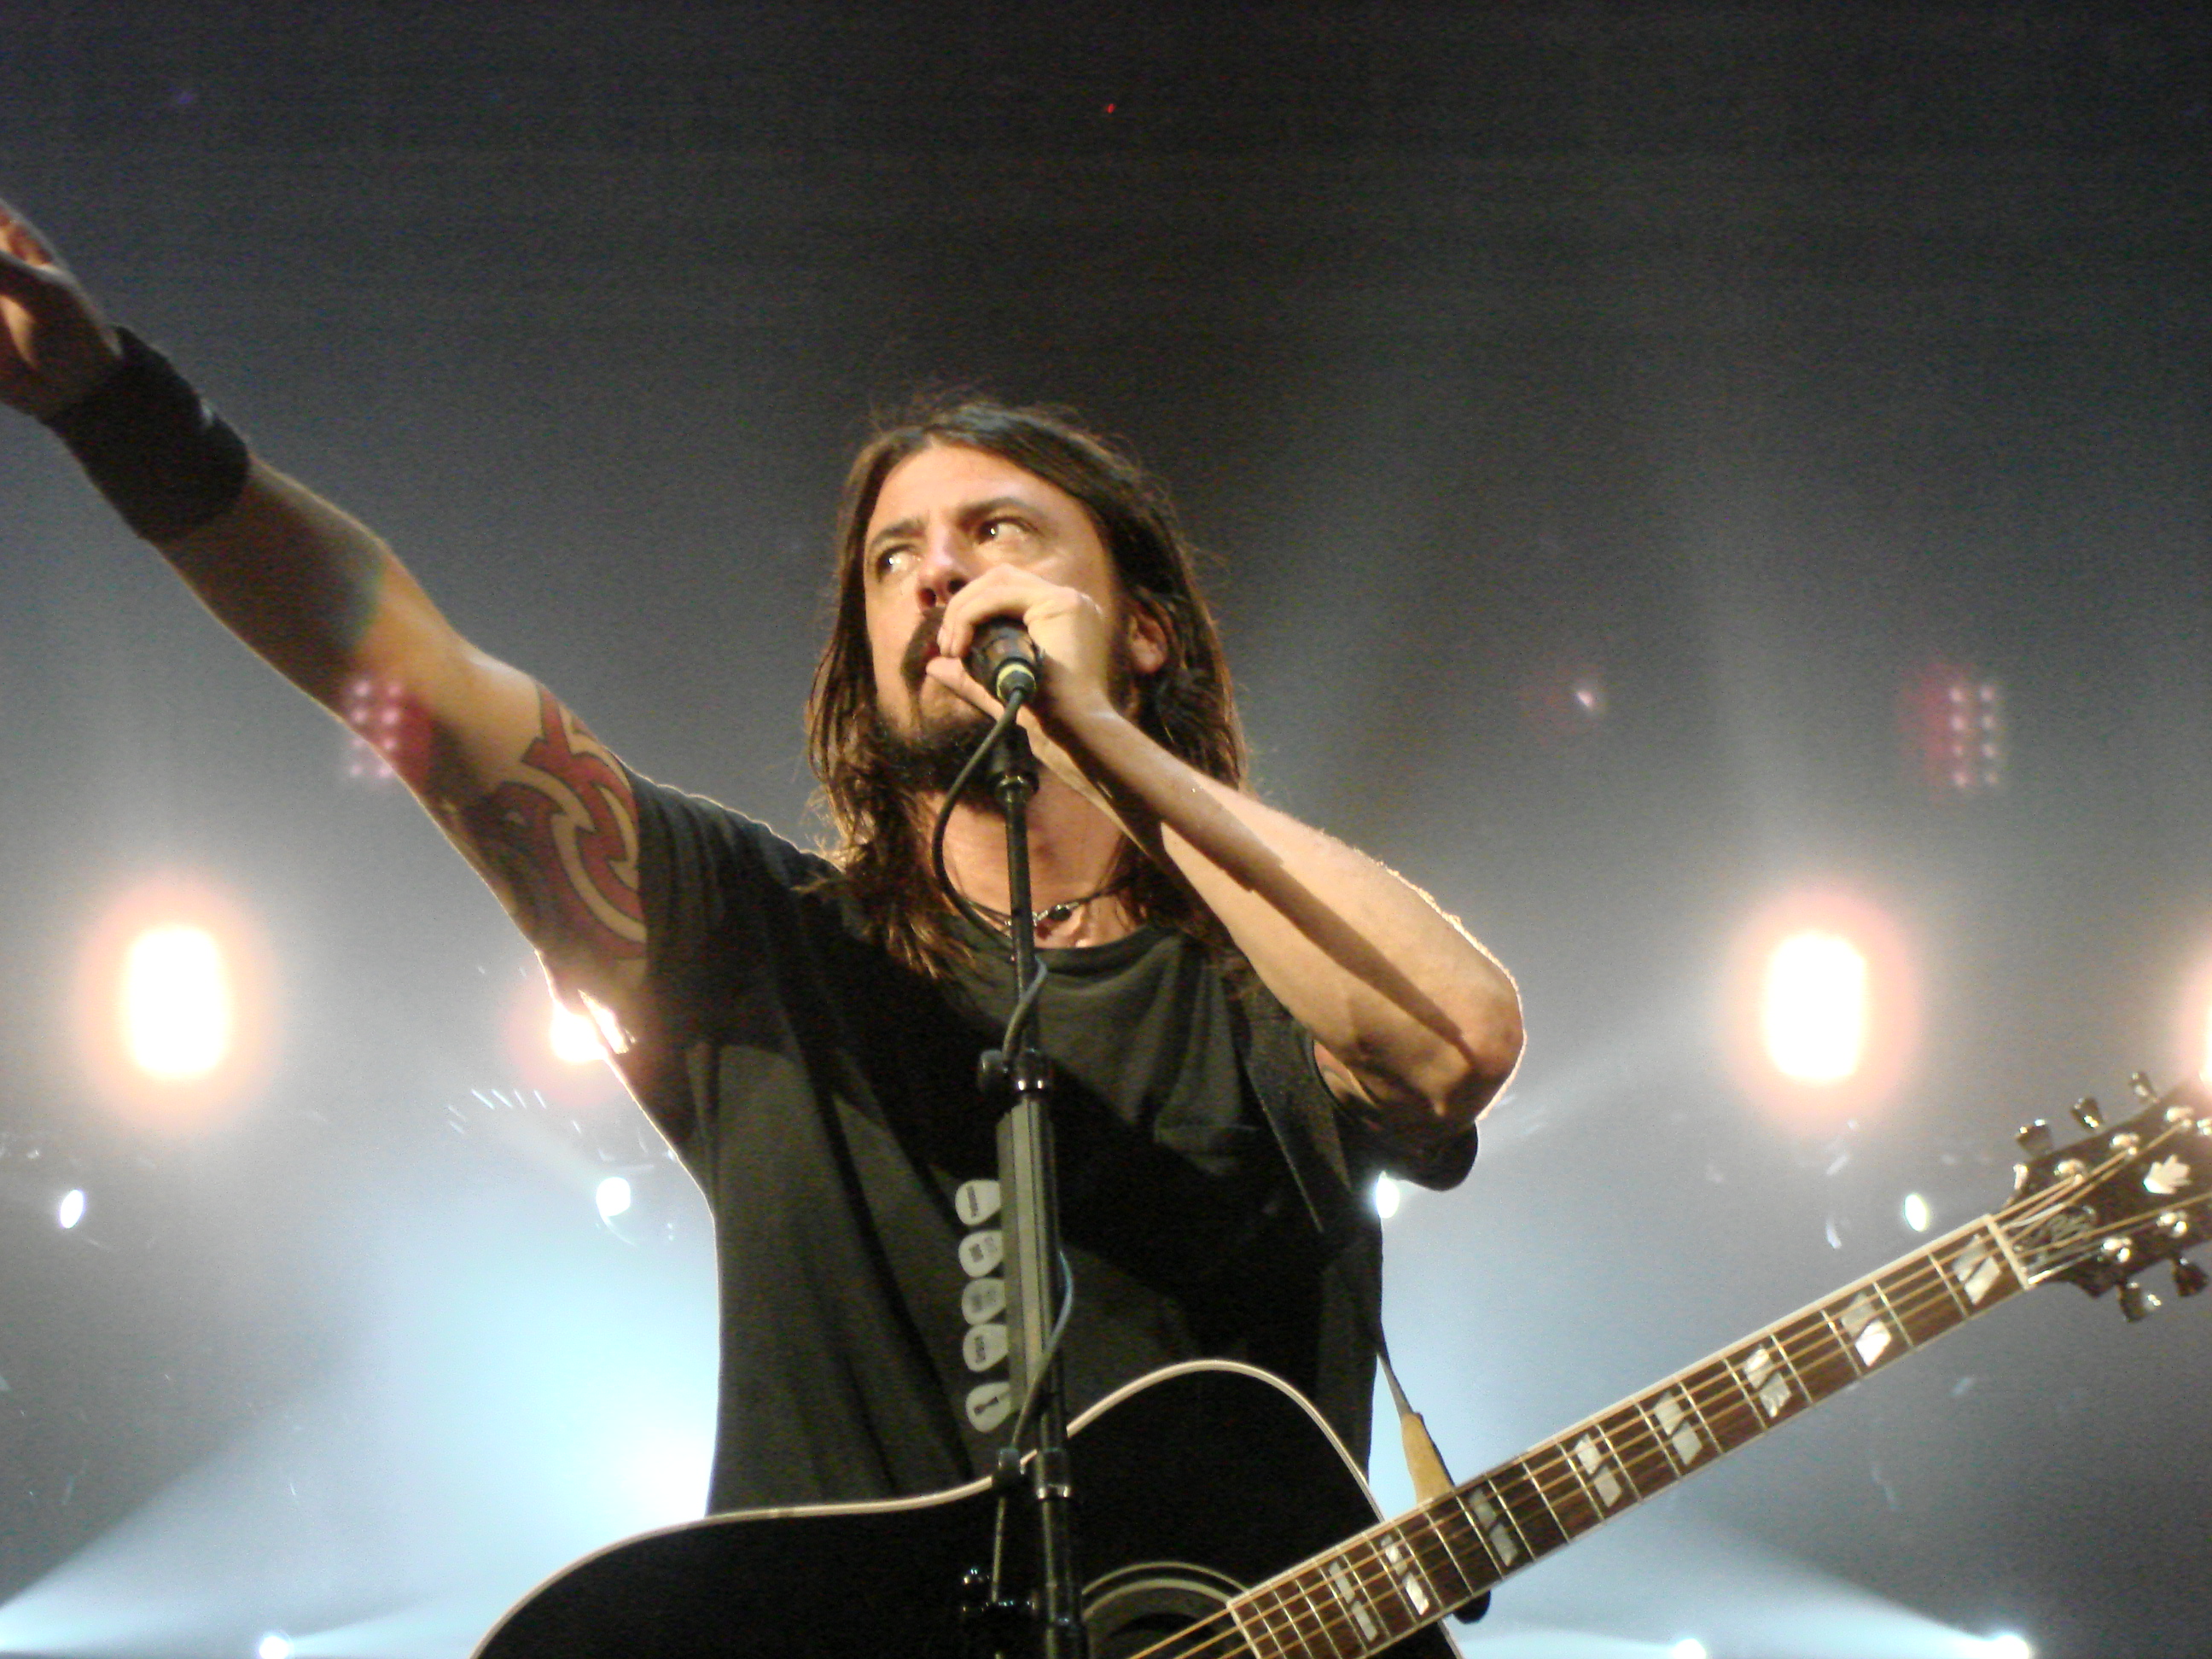 Music Dave Grohl 2592x1944